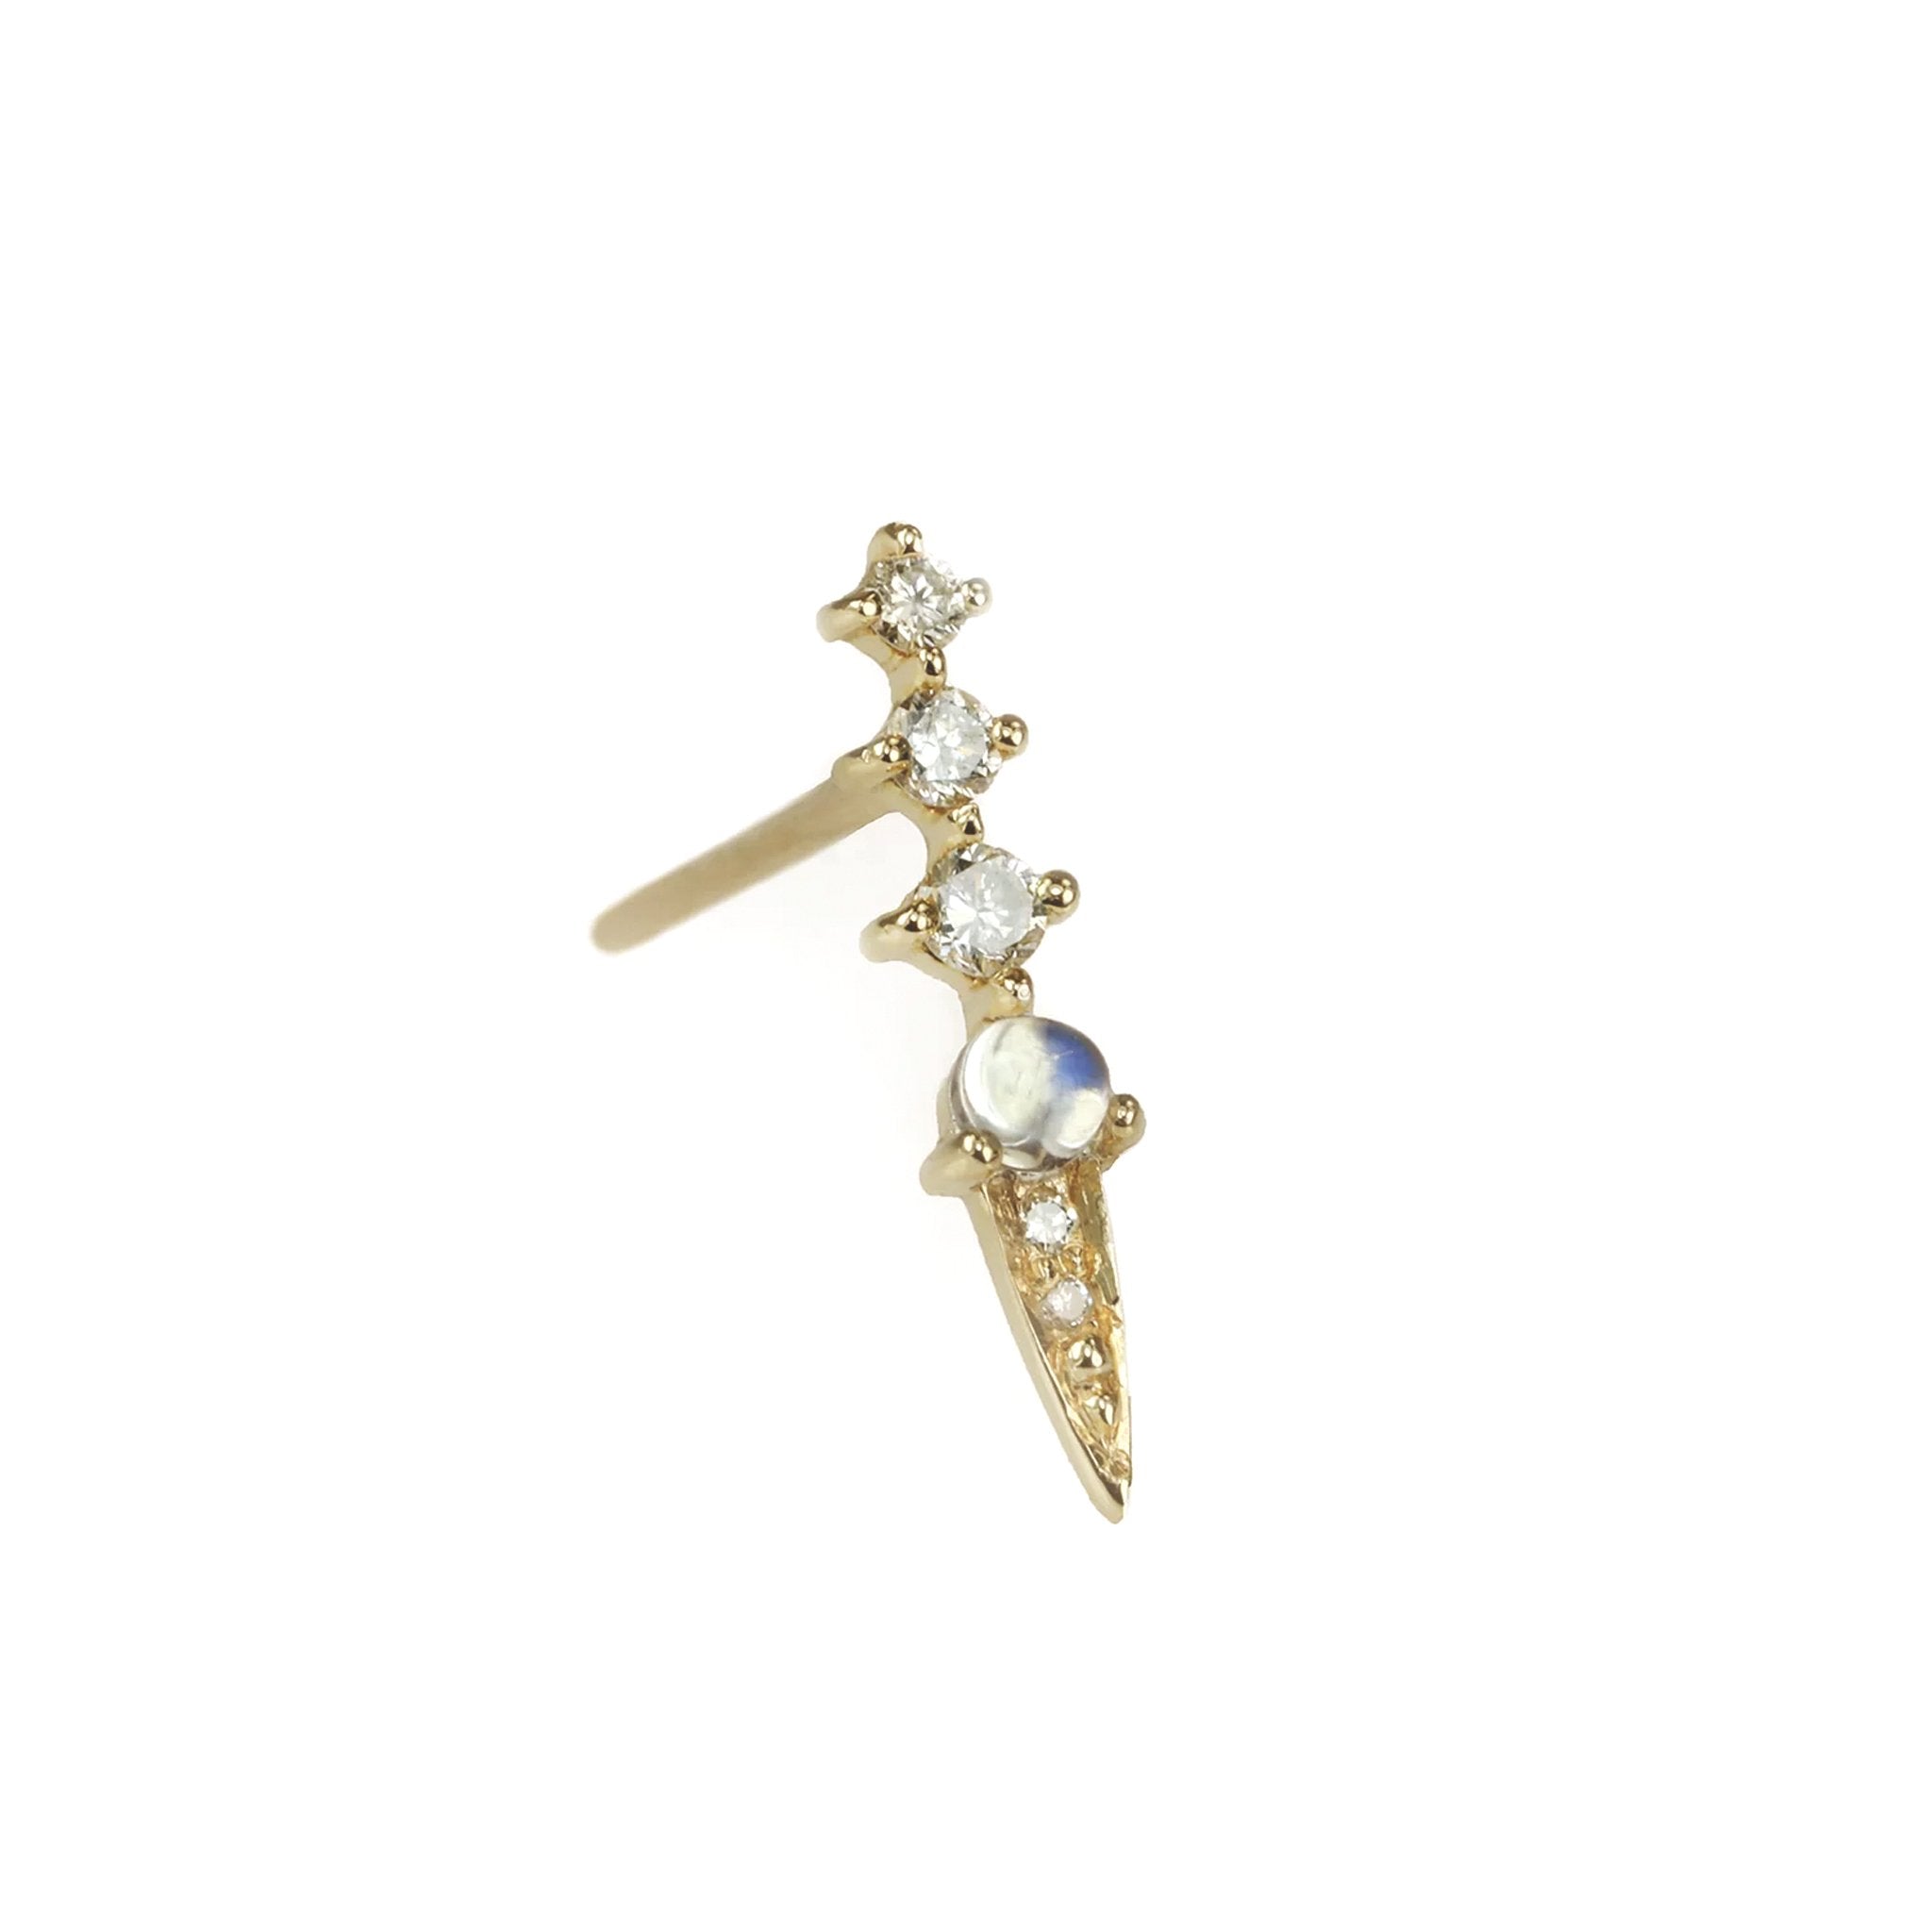 Celine Daoust Gold Moonstone and Diamond "Spike" Earring